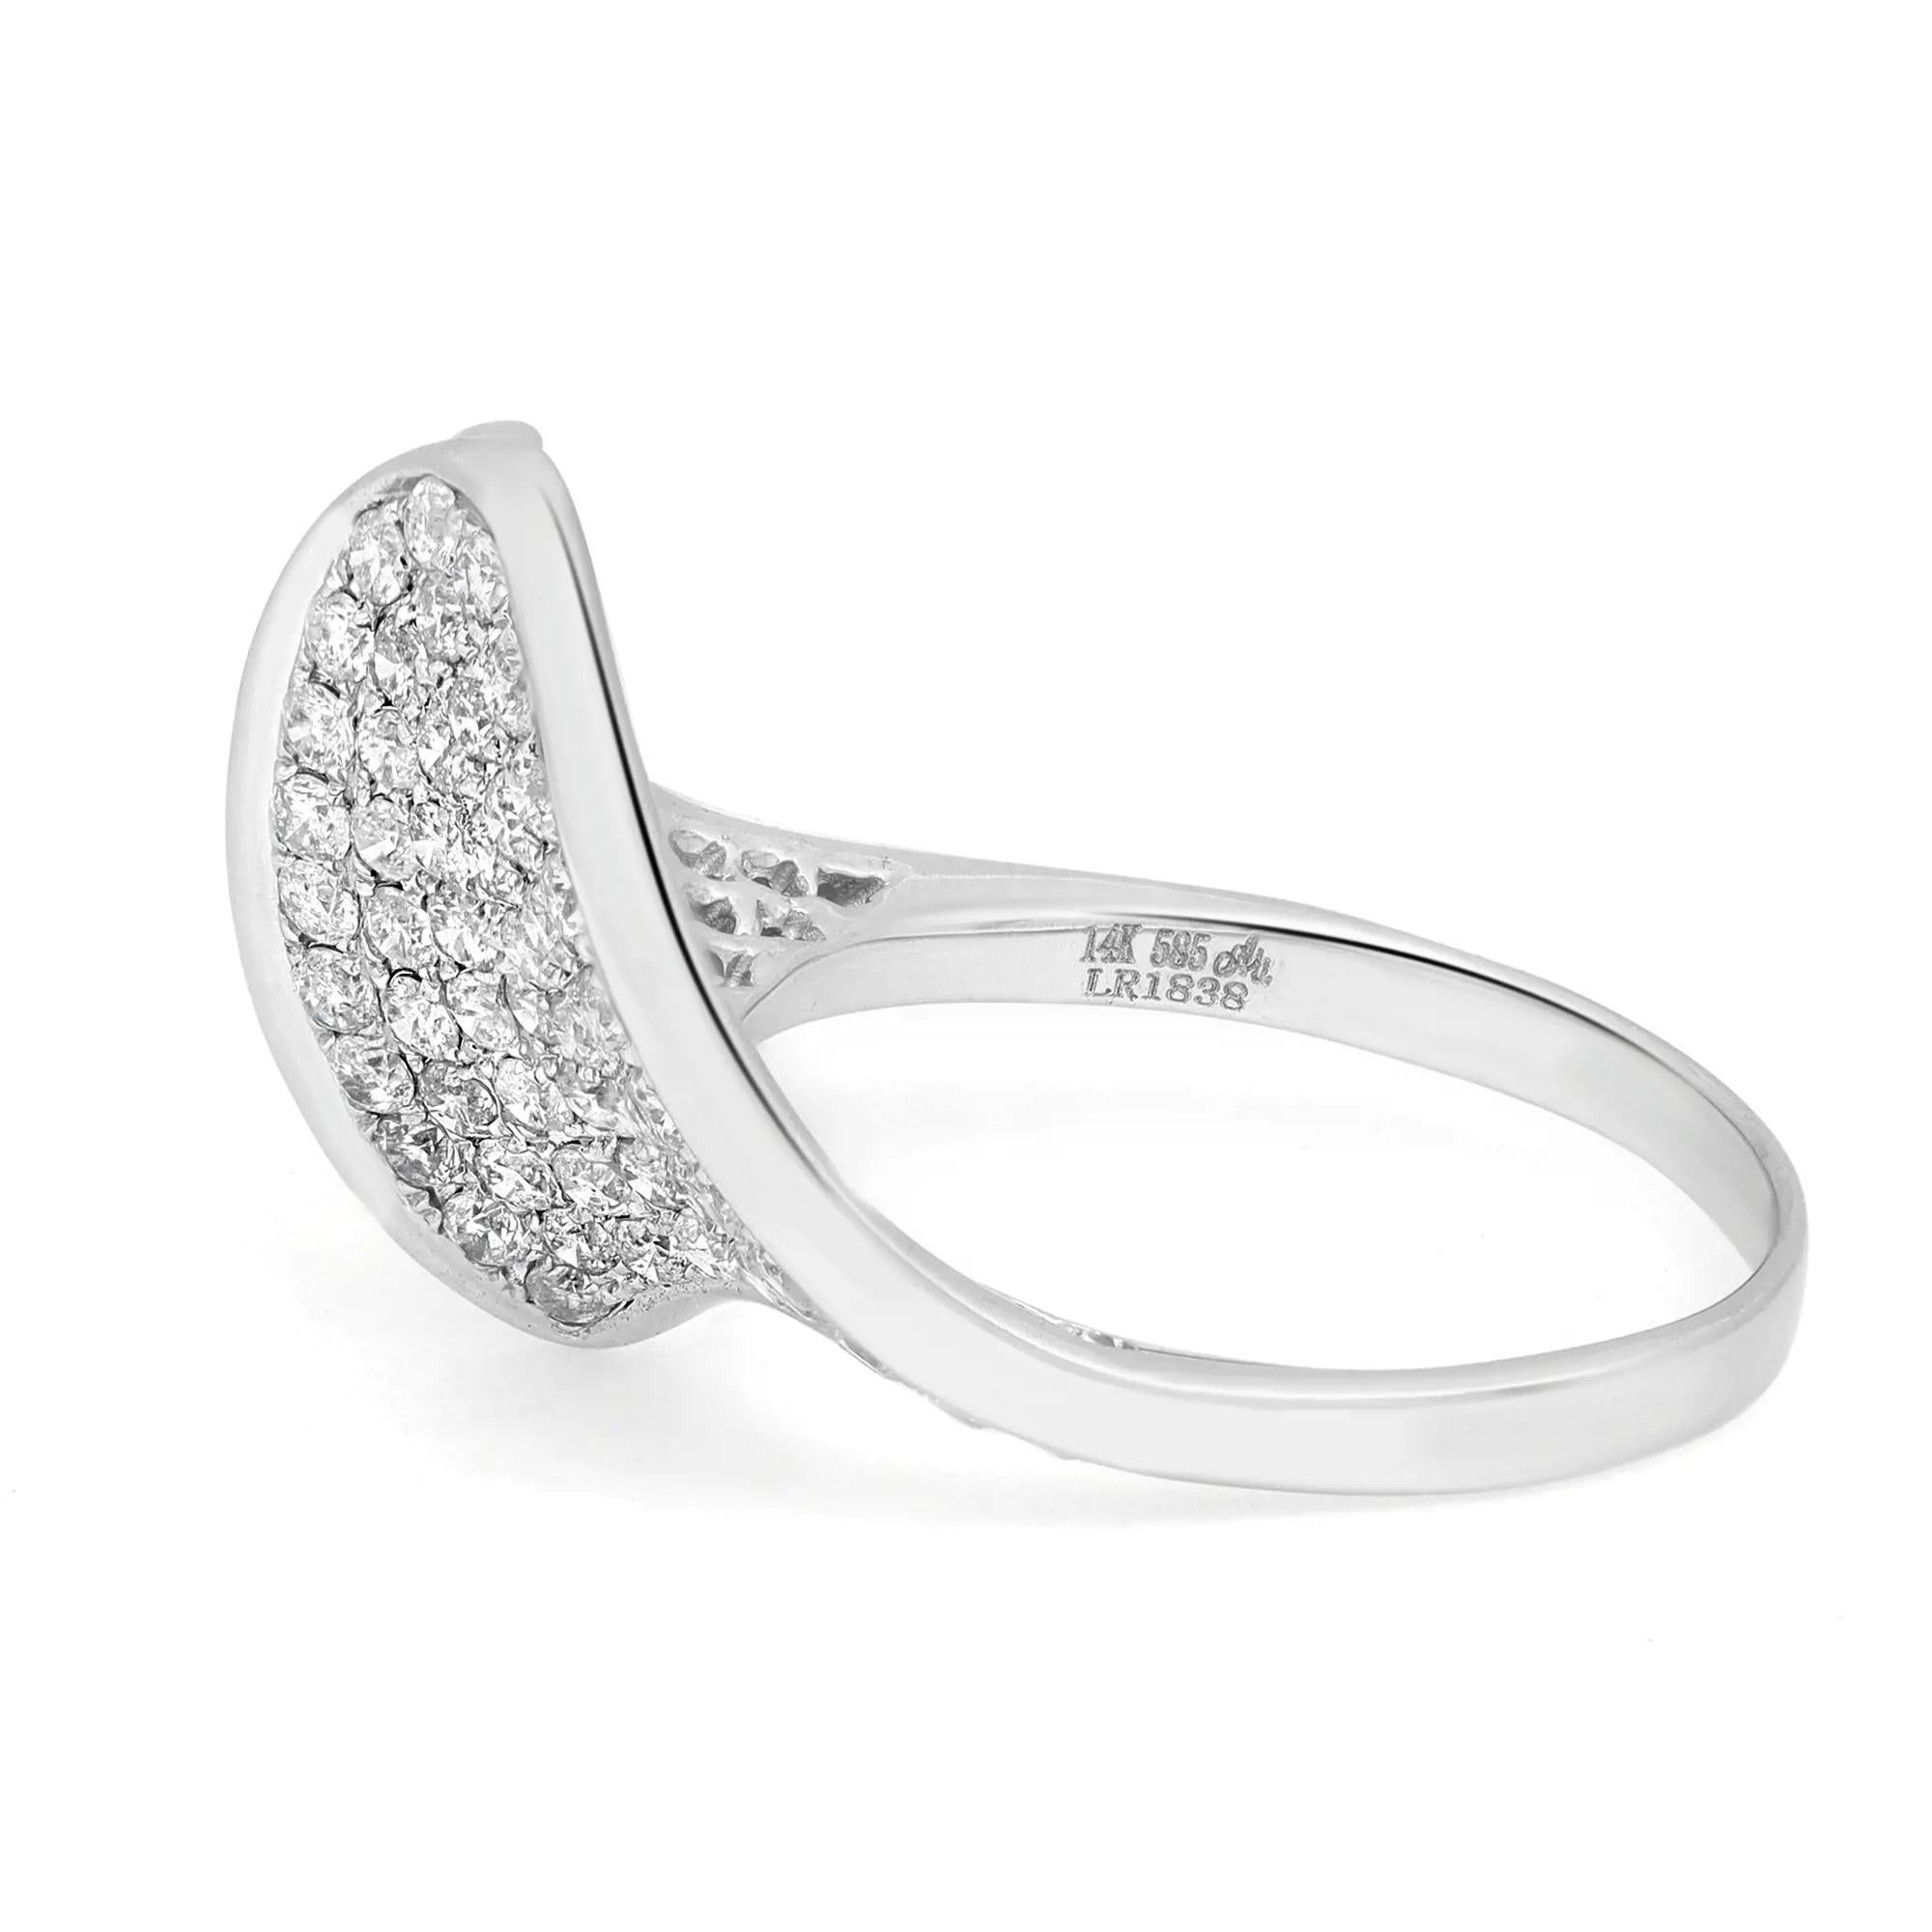 Bold and elegant diamond cocktail ring rendered in highly polished 14K white gold. This ring features sparkling round cut diamonds in pave setting totaling 1.58 carats. Diamond quality: H - I color and SI1 clarity. Ring size: 7.5. Total weight: 6.06